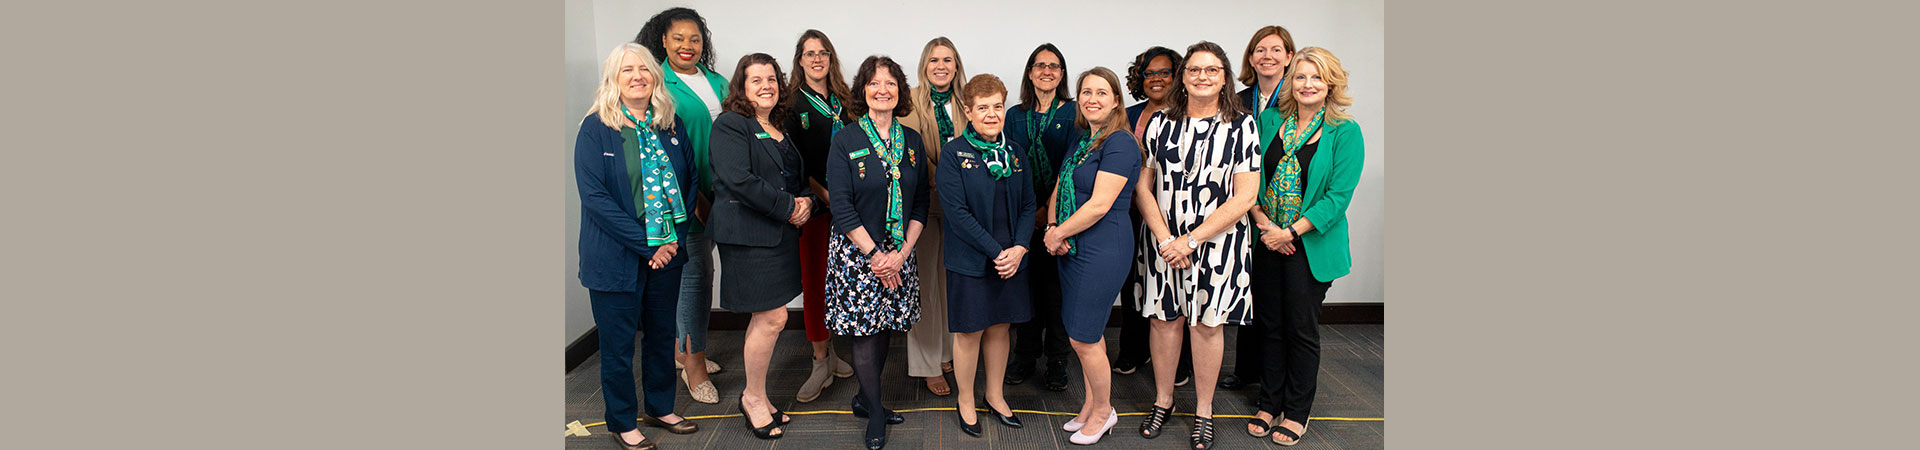  A diverse group of 13 women wearing different combinations of navy blue, white, and green 